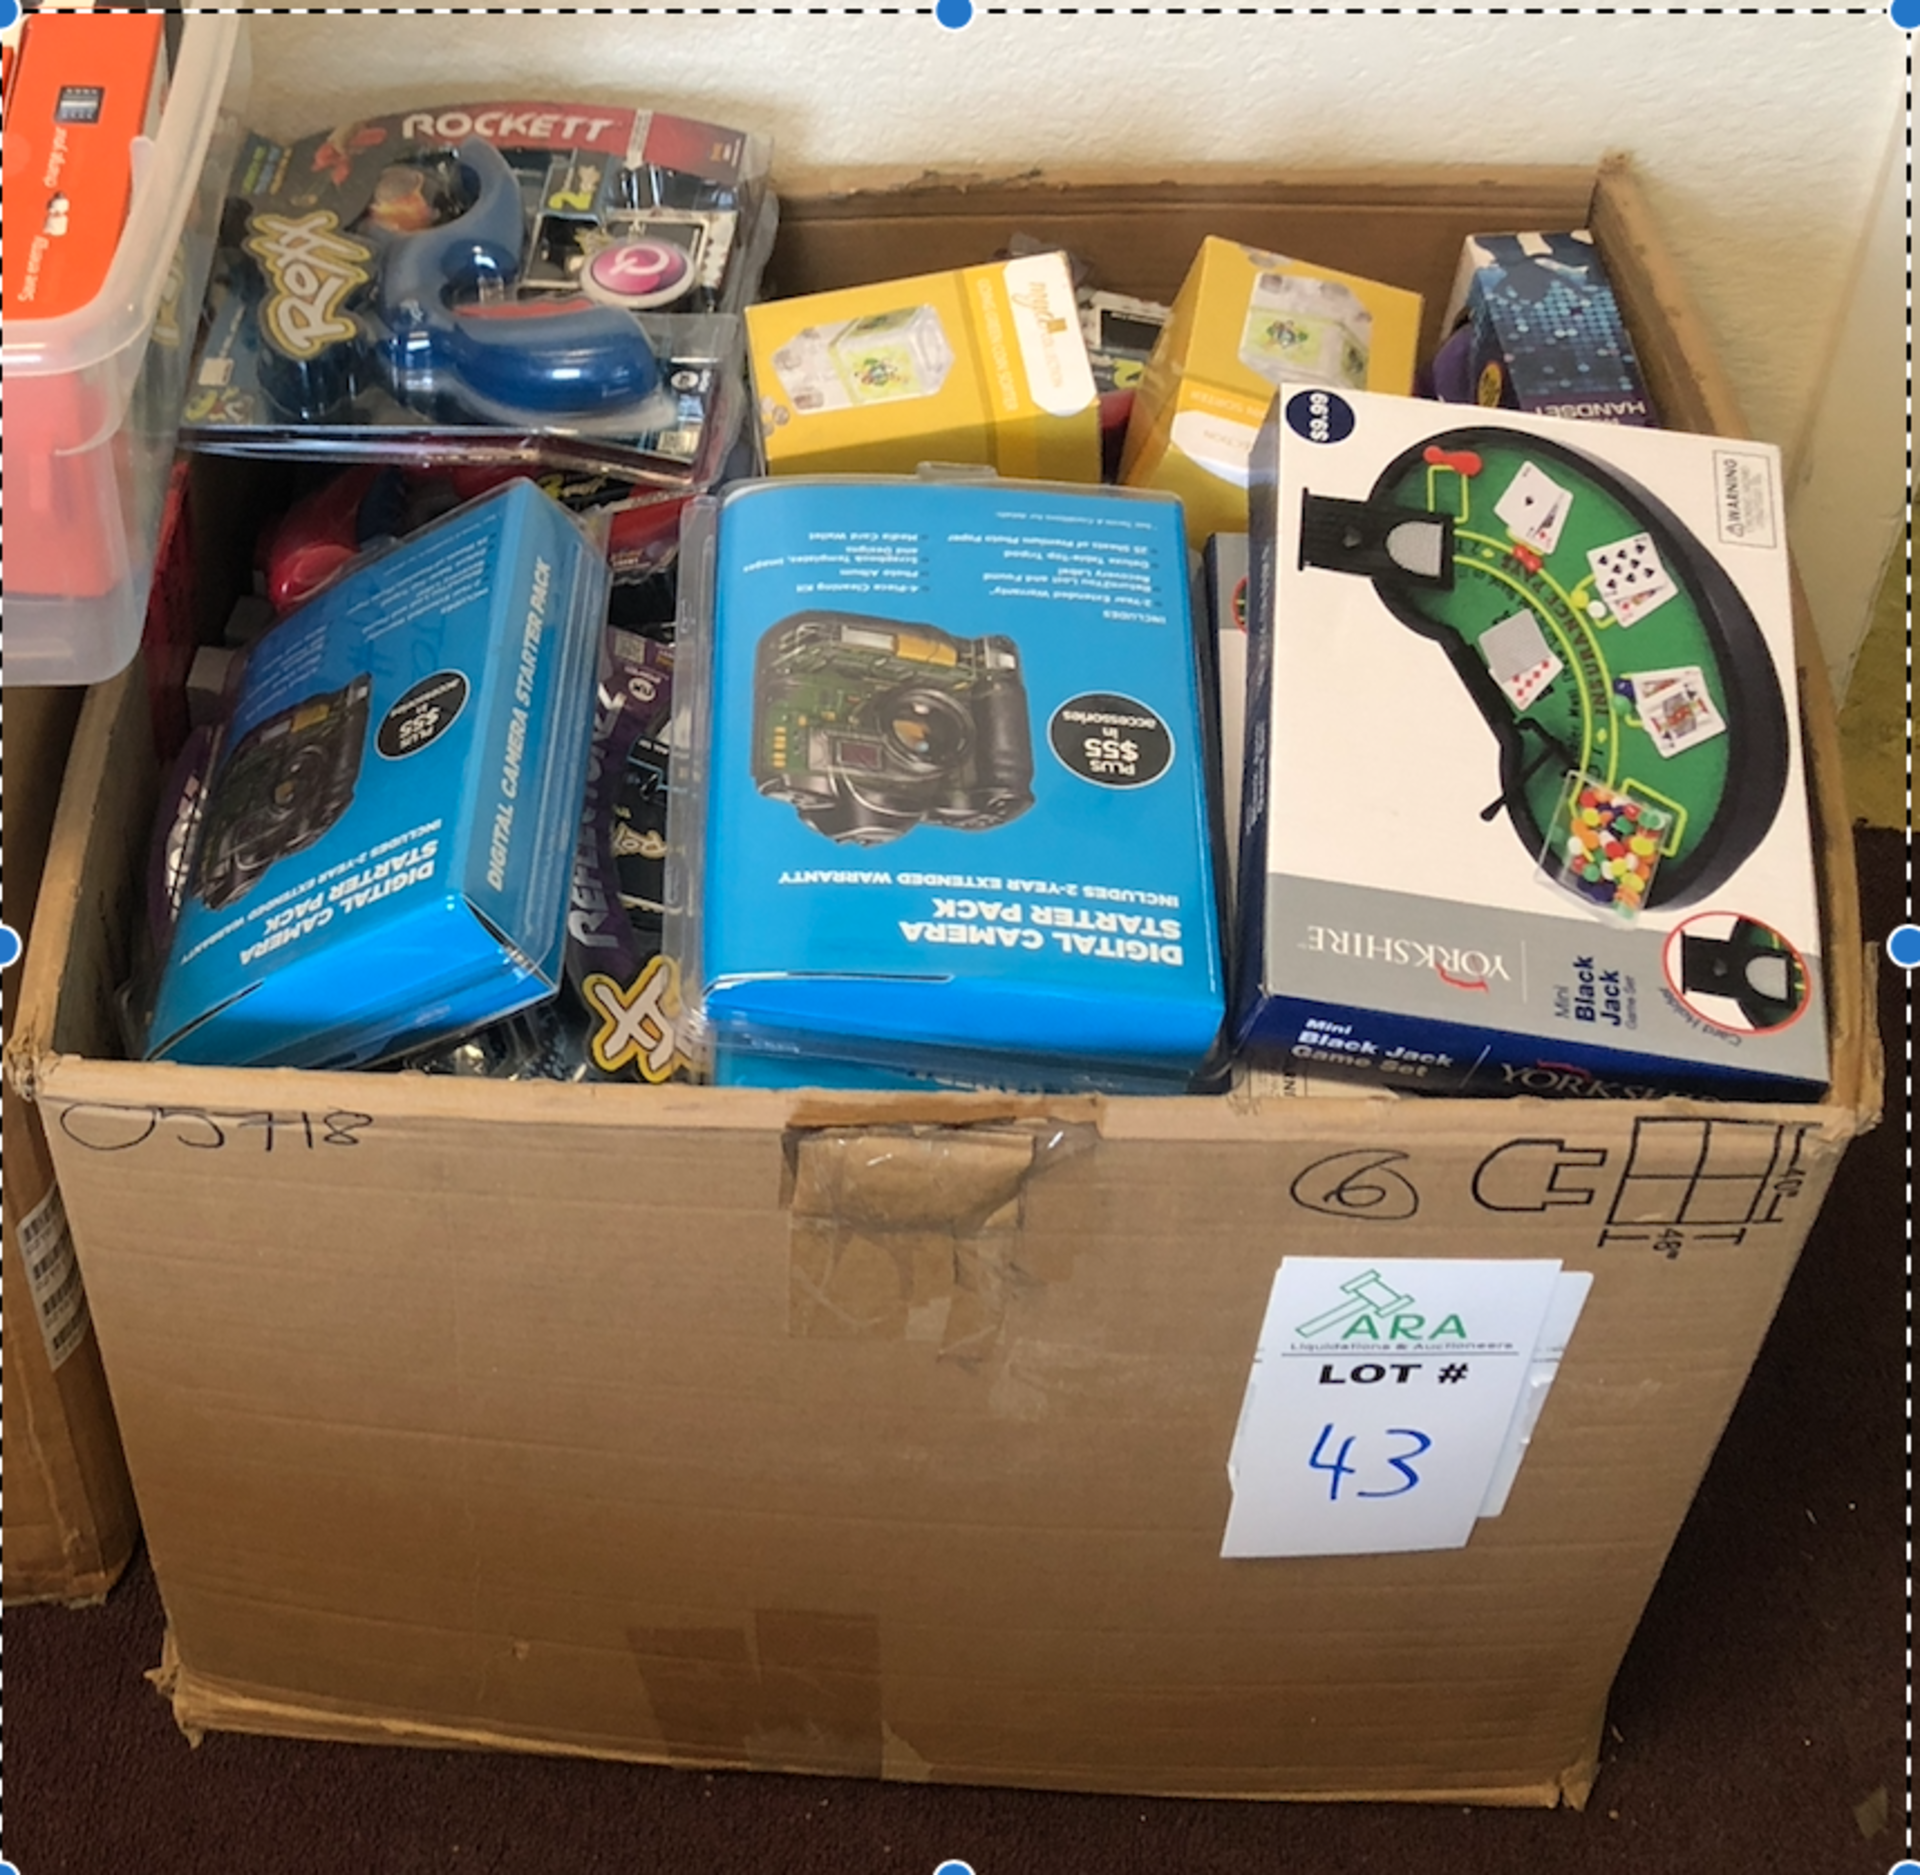 HUGE BOX WITH MISC RETAIL ITEMS, TOYS AND LOTS OF MIXED ITEMS - Image 2 of 2